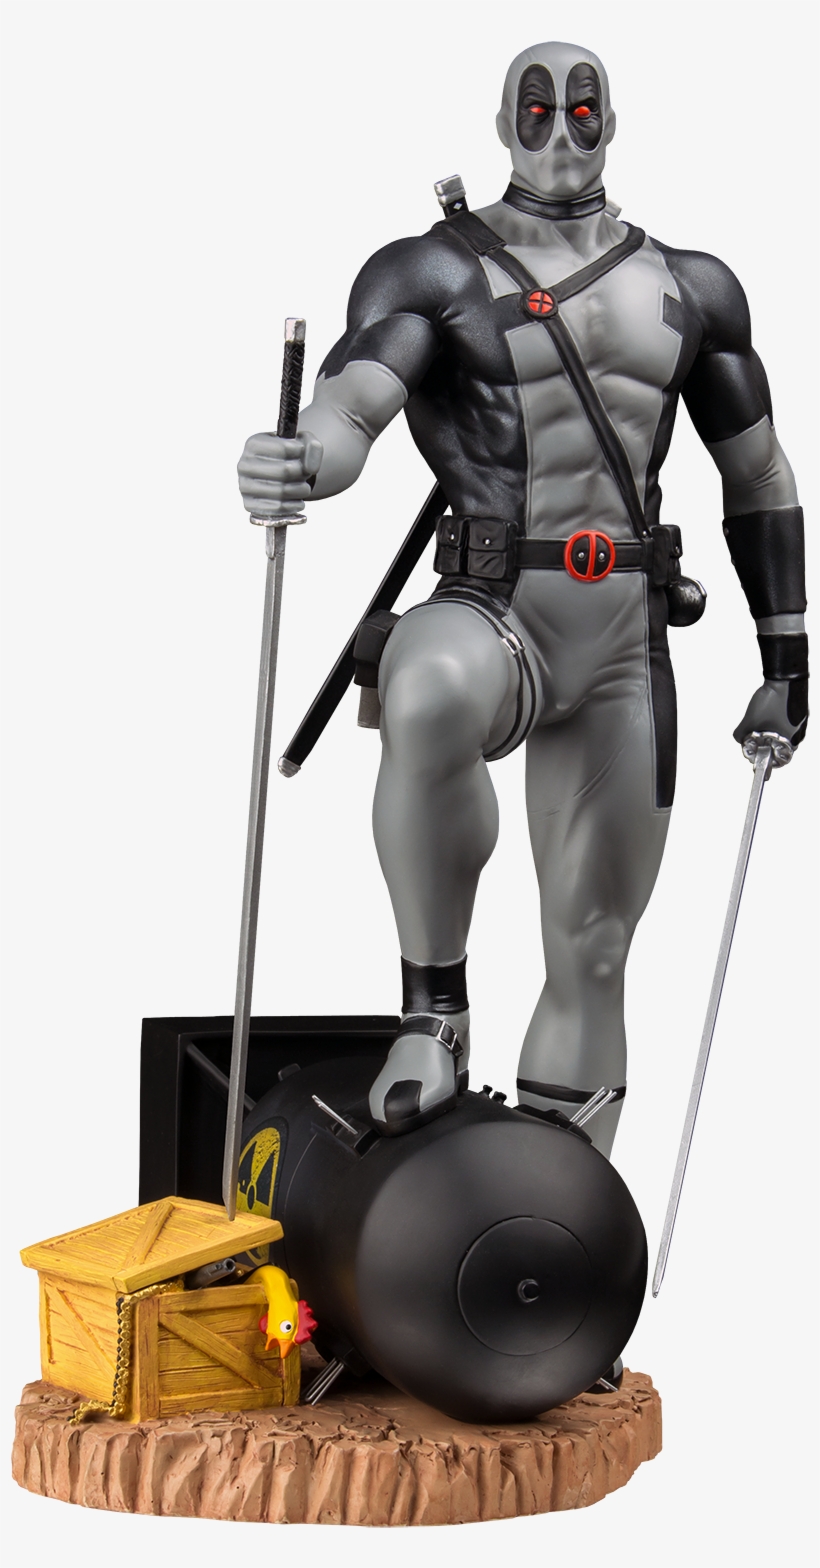 X-force Deadpool On Atom Bomb 1/6 Scale Ikon Collectibles - 1 4 Scale Deadpool Statue Sold Out Edition, transparent png #2895770